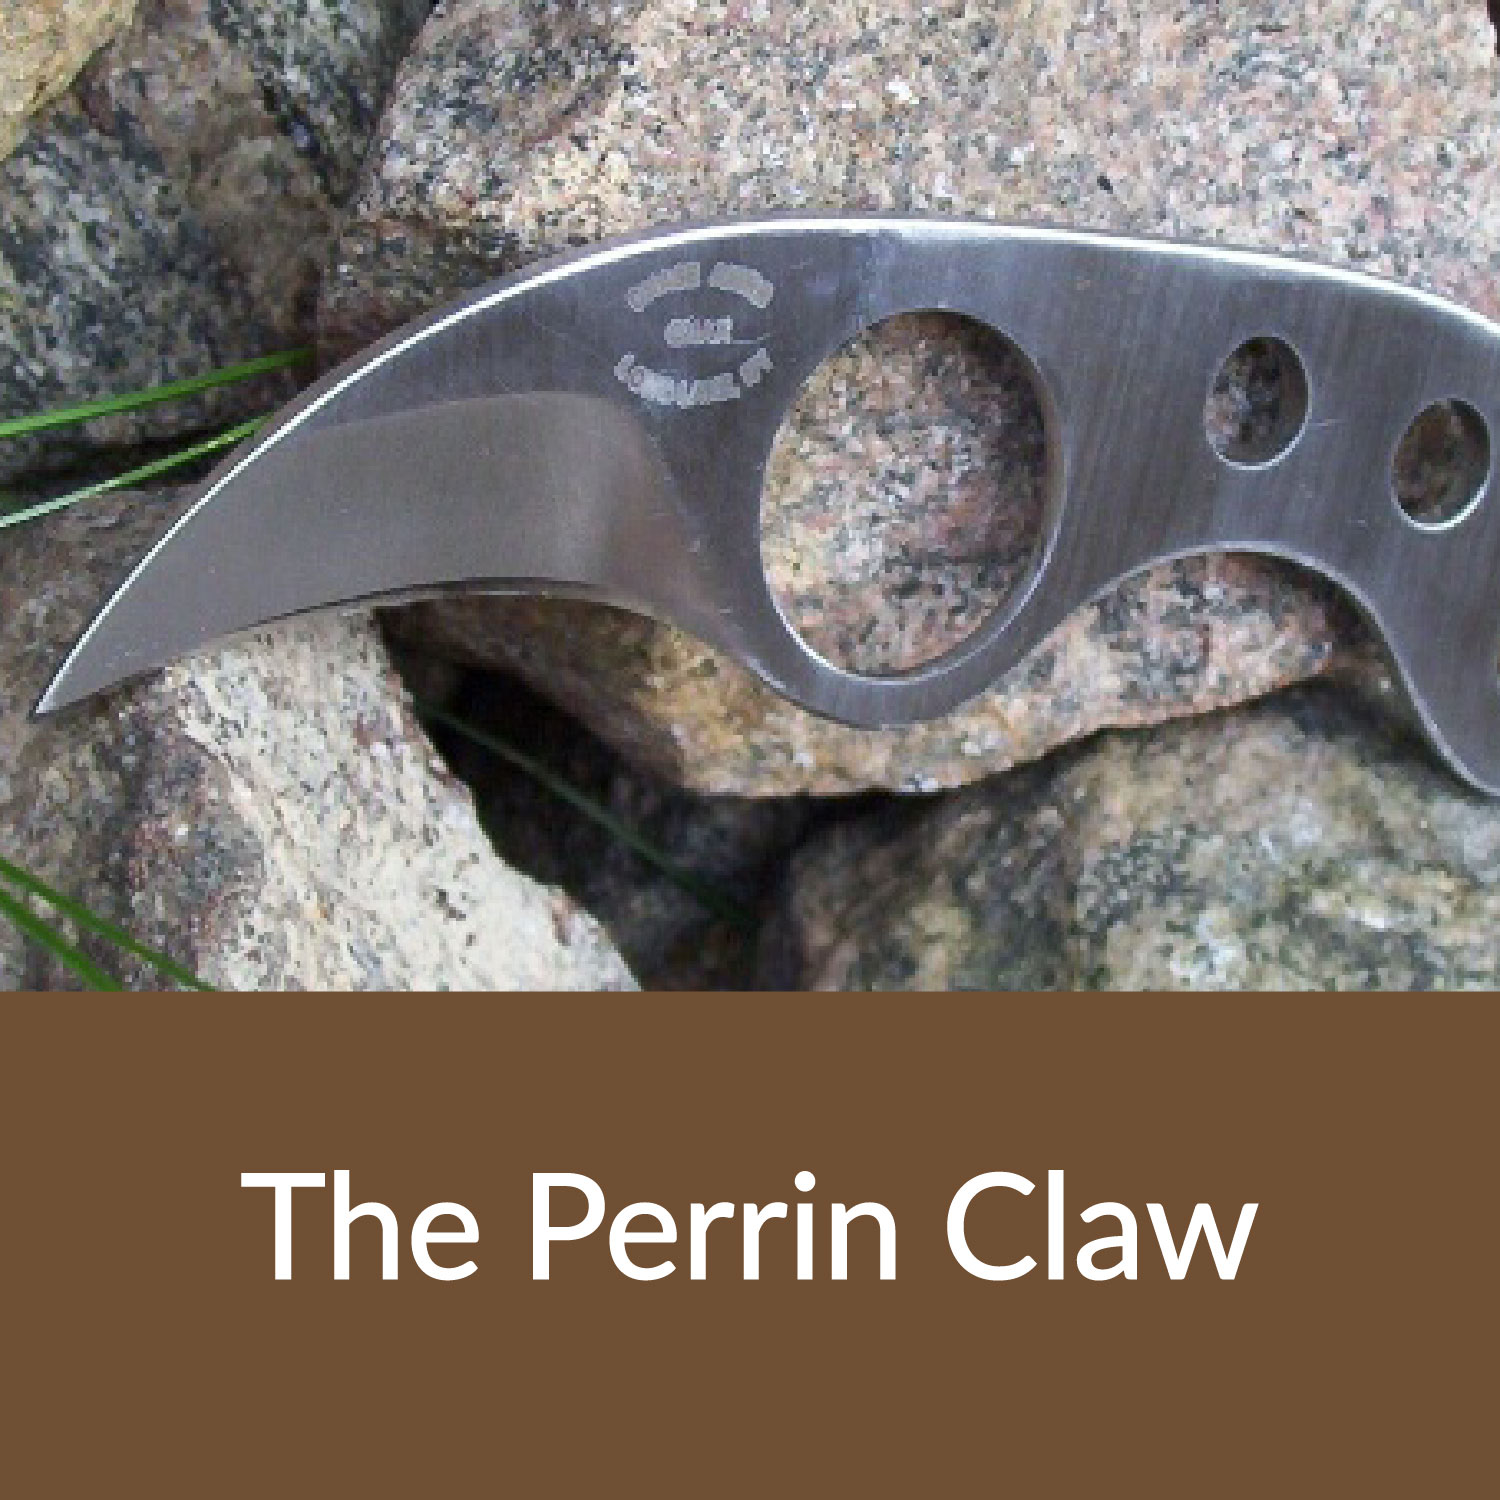 The Perrin Claw